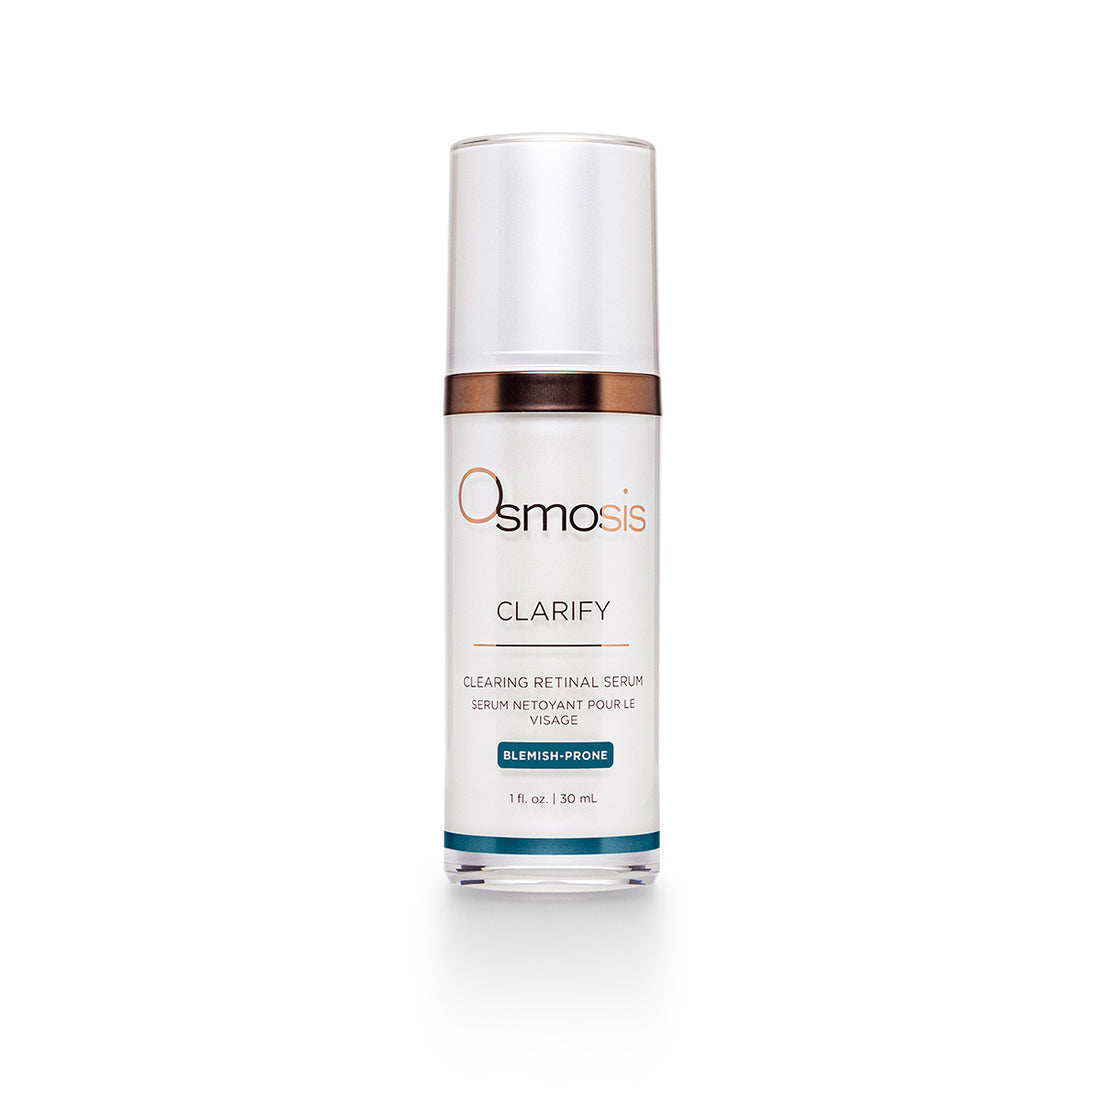 Osmosis Skincare Clarify Serum will relieve acne blemishes leaving your skin healthy and vibrant